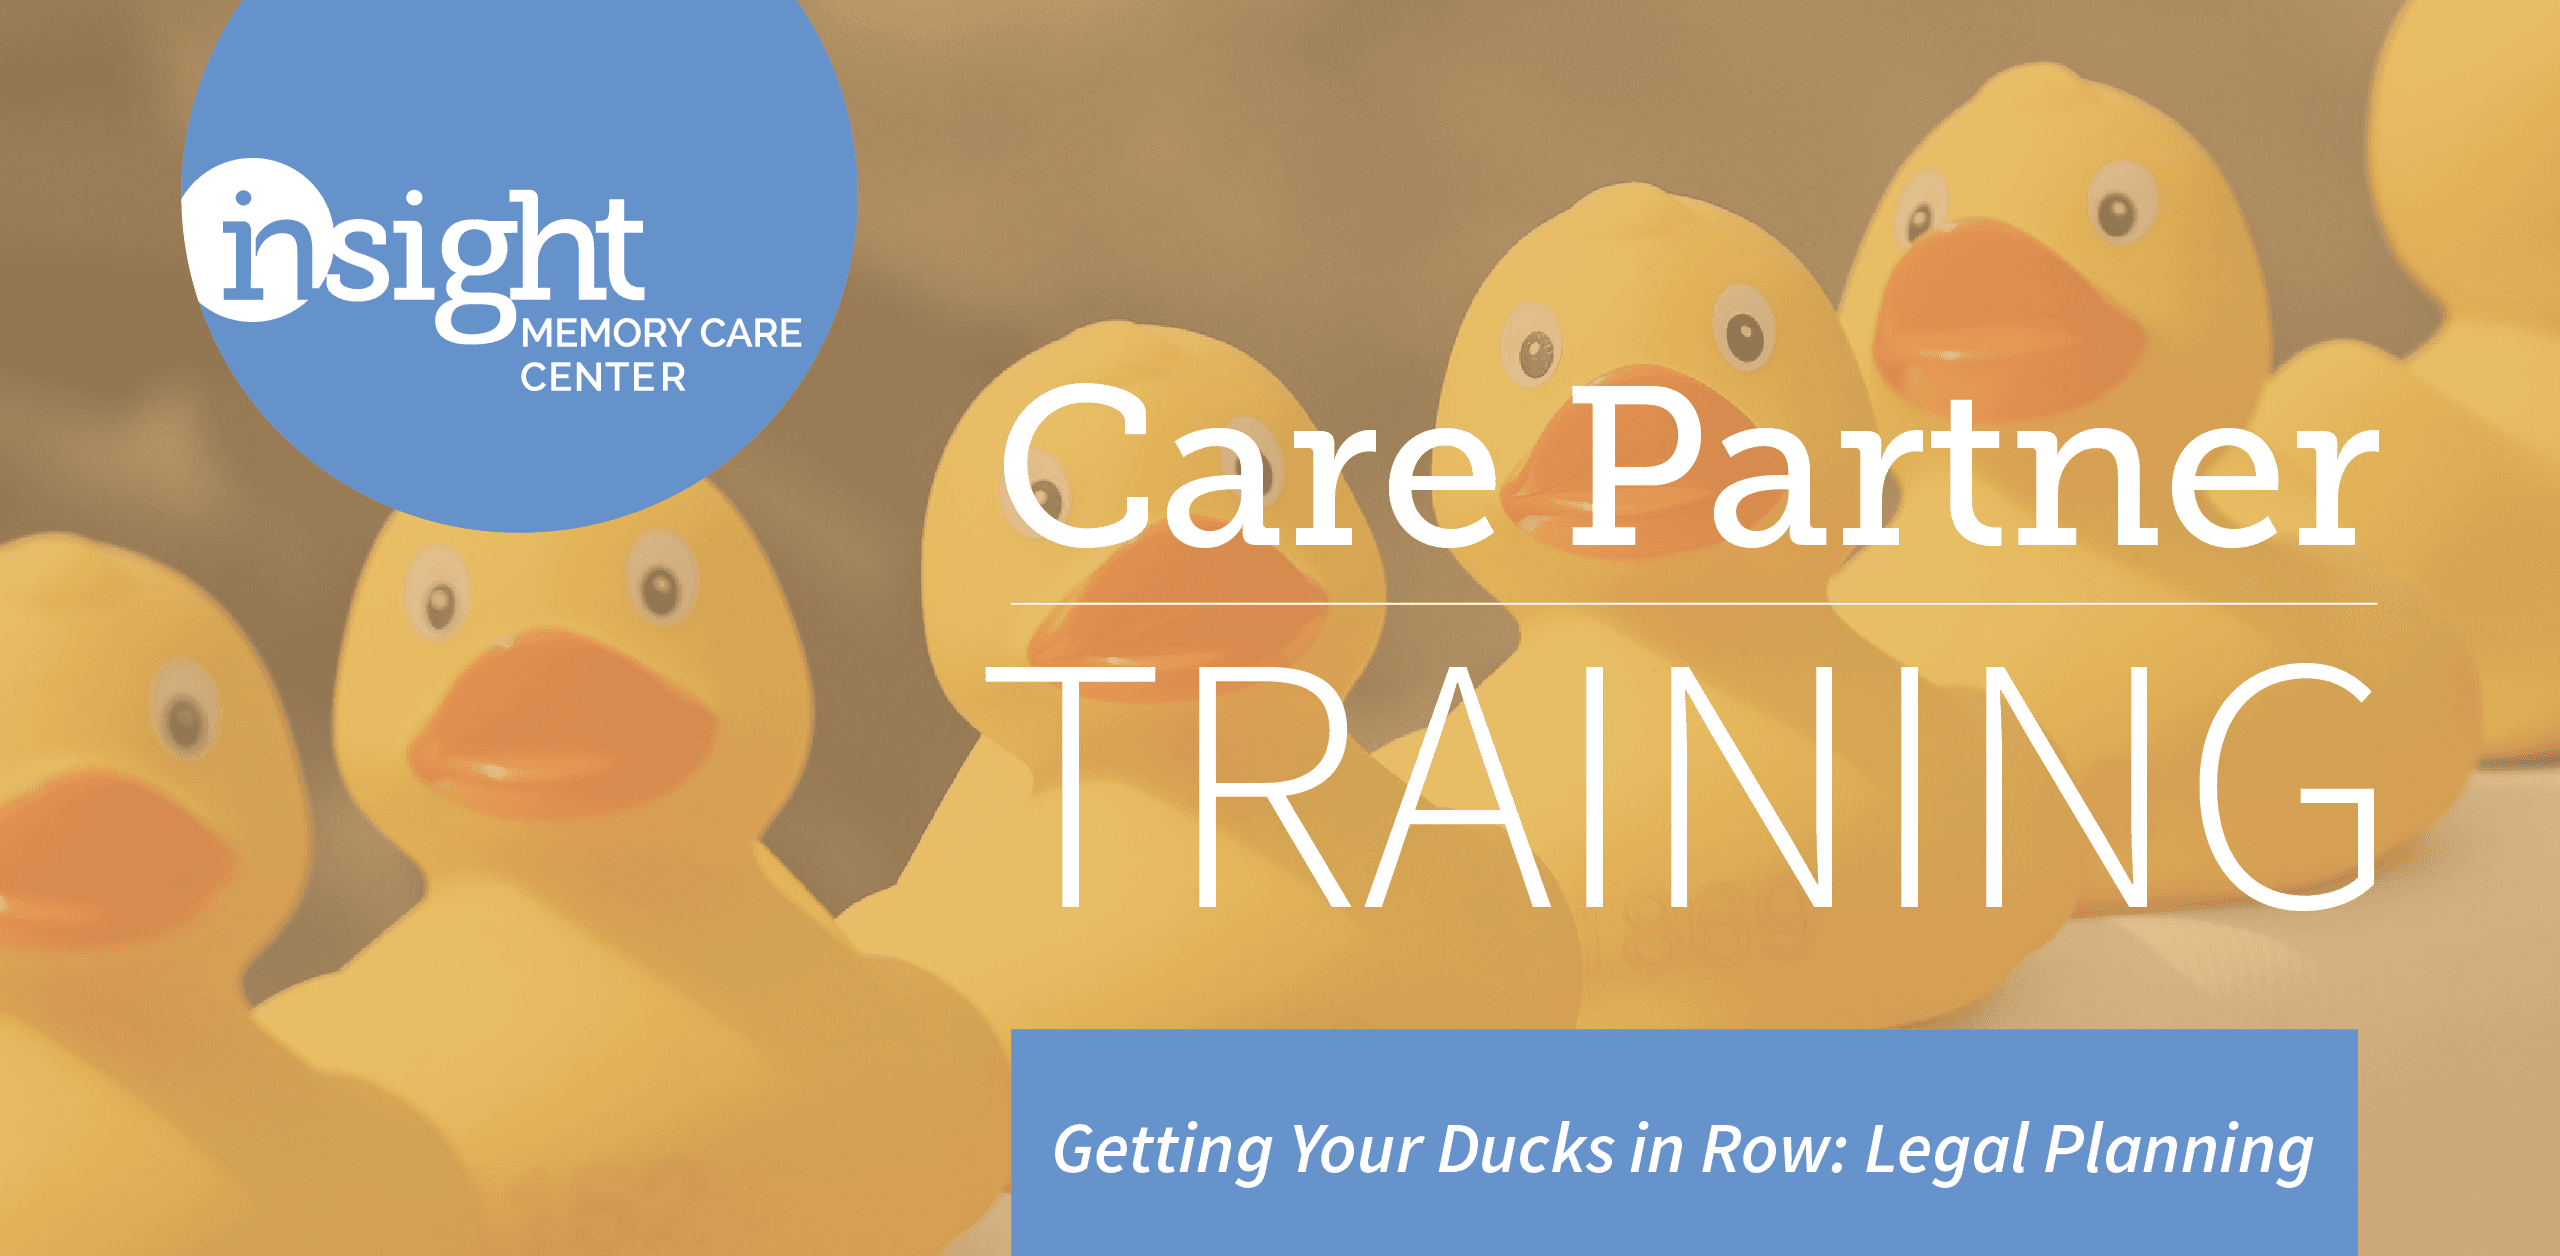 Getting Your Ducks in a Row: Legal Planning